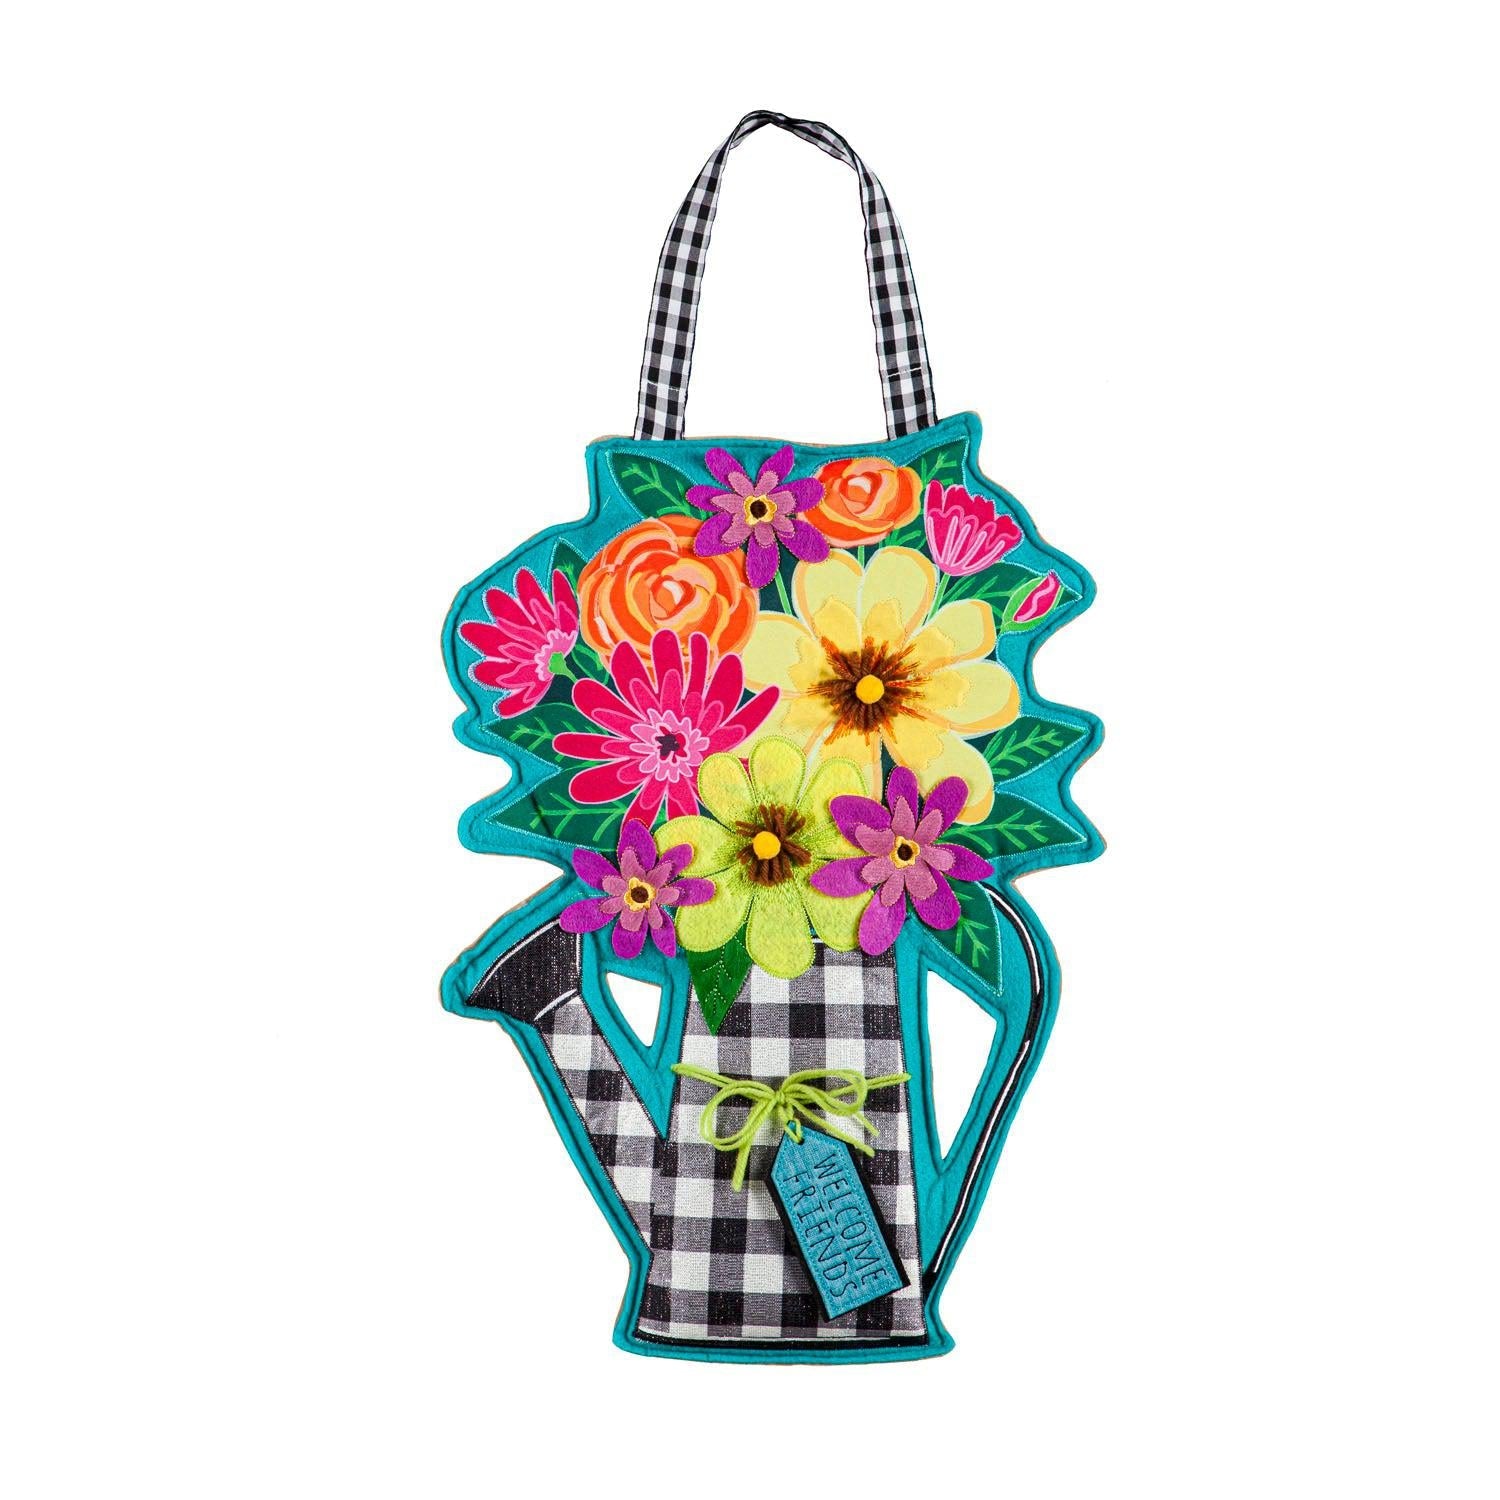 The Buffalo Check Watering Can door décor features a black checked watering can holding a bouquet of flowers and a tag with the words "Welcome Friends". 